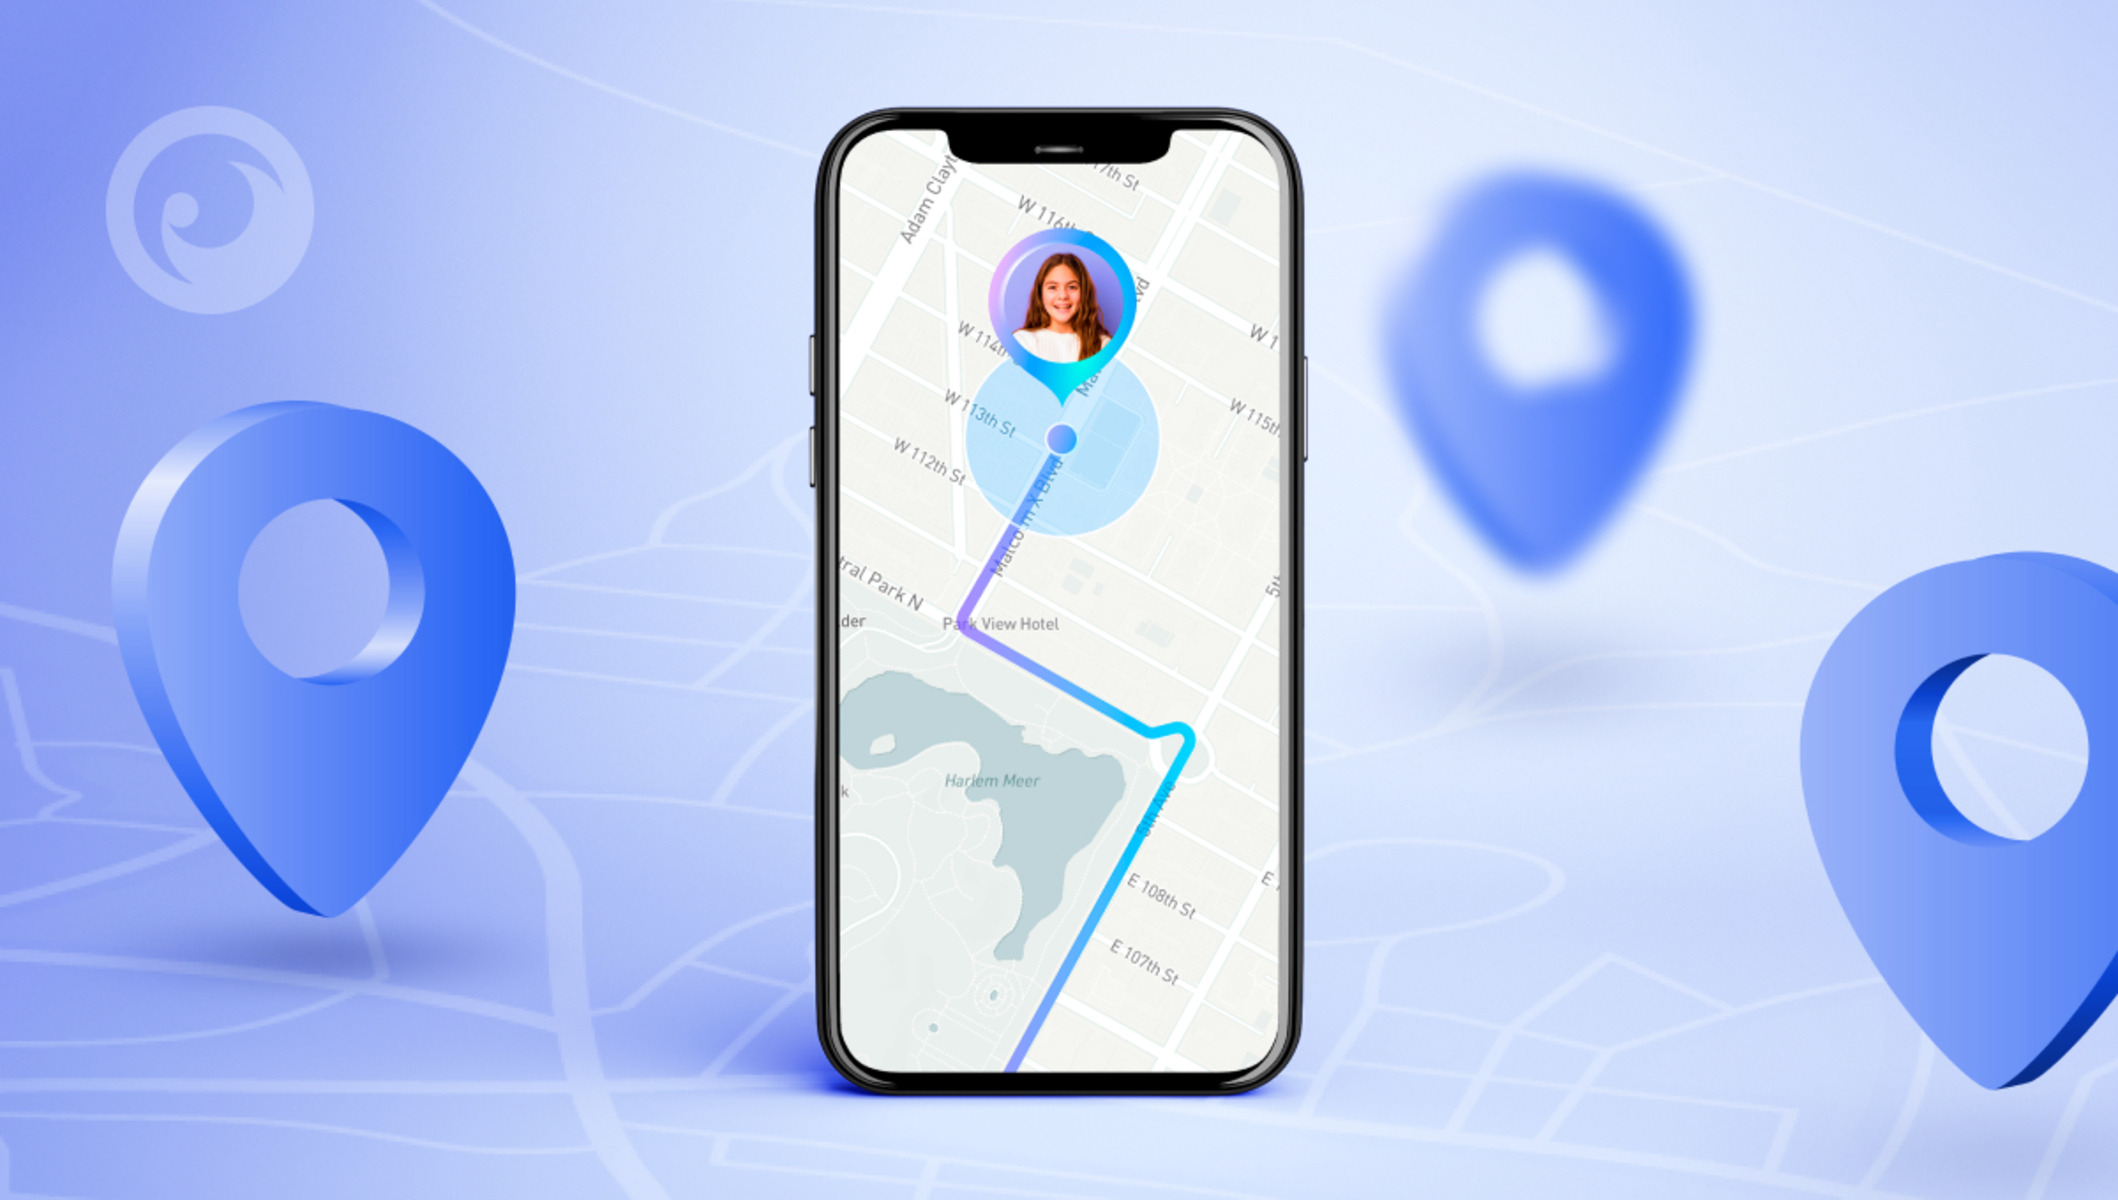 Personal Tracking: How To Install A GPS Tracker On Your Phone